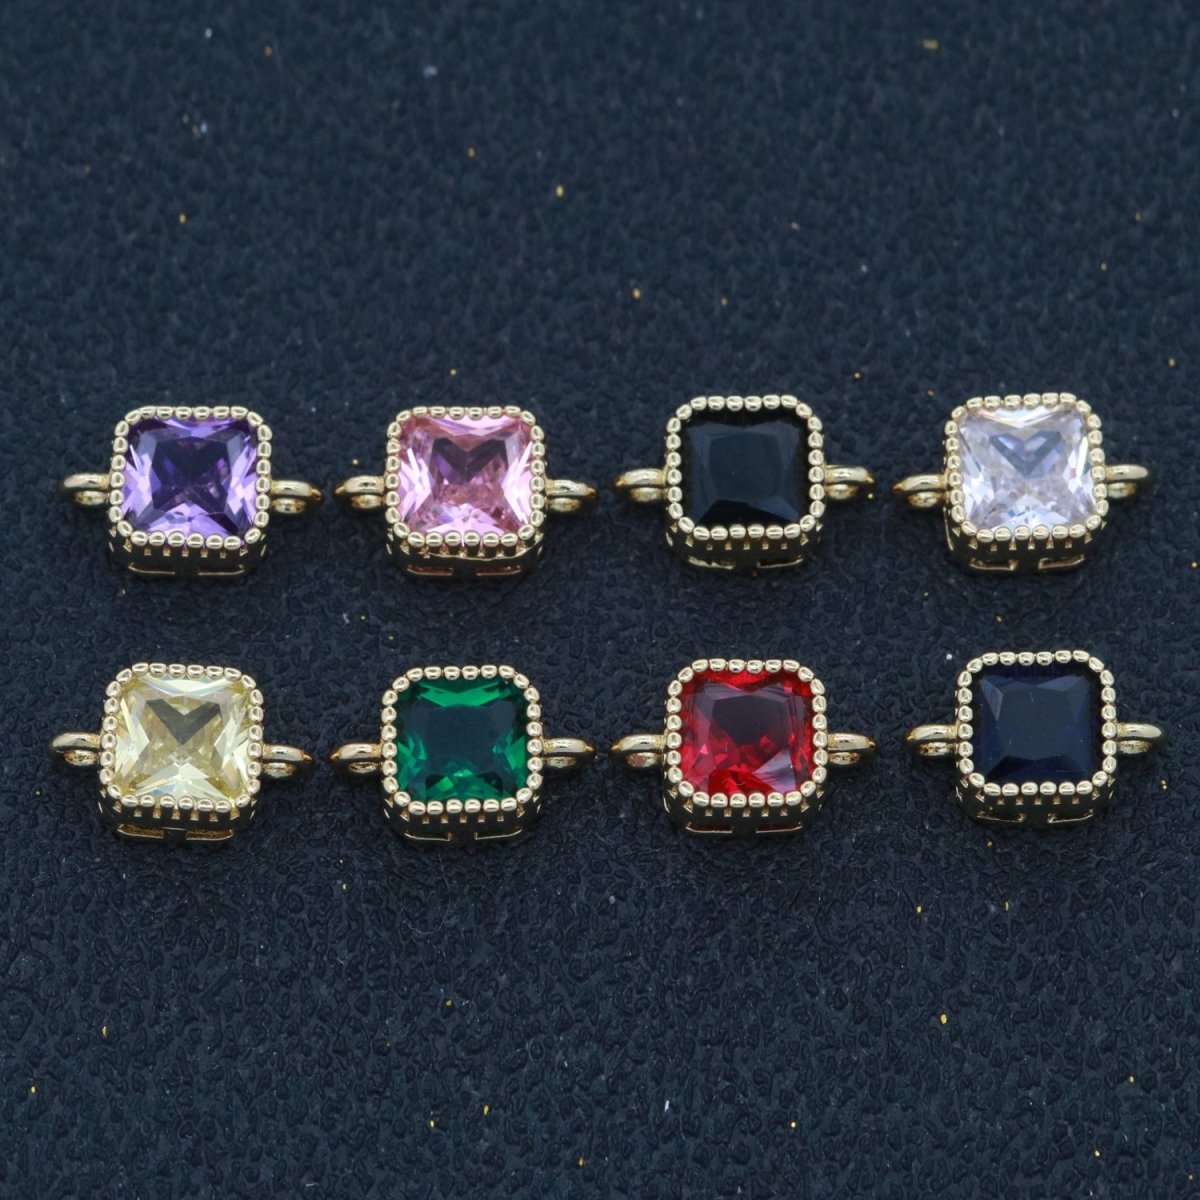 Mini Square Charm Connector Cubic Love Cz Colorful Link Connector for Necklace Bracelet Earring Supply N-025 - N-032 - DLUXCA